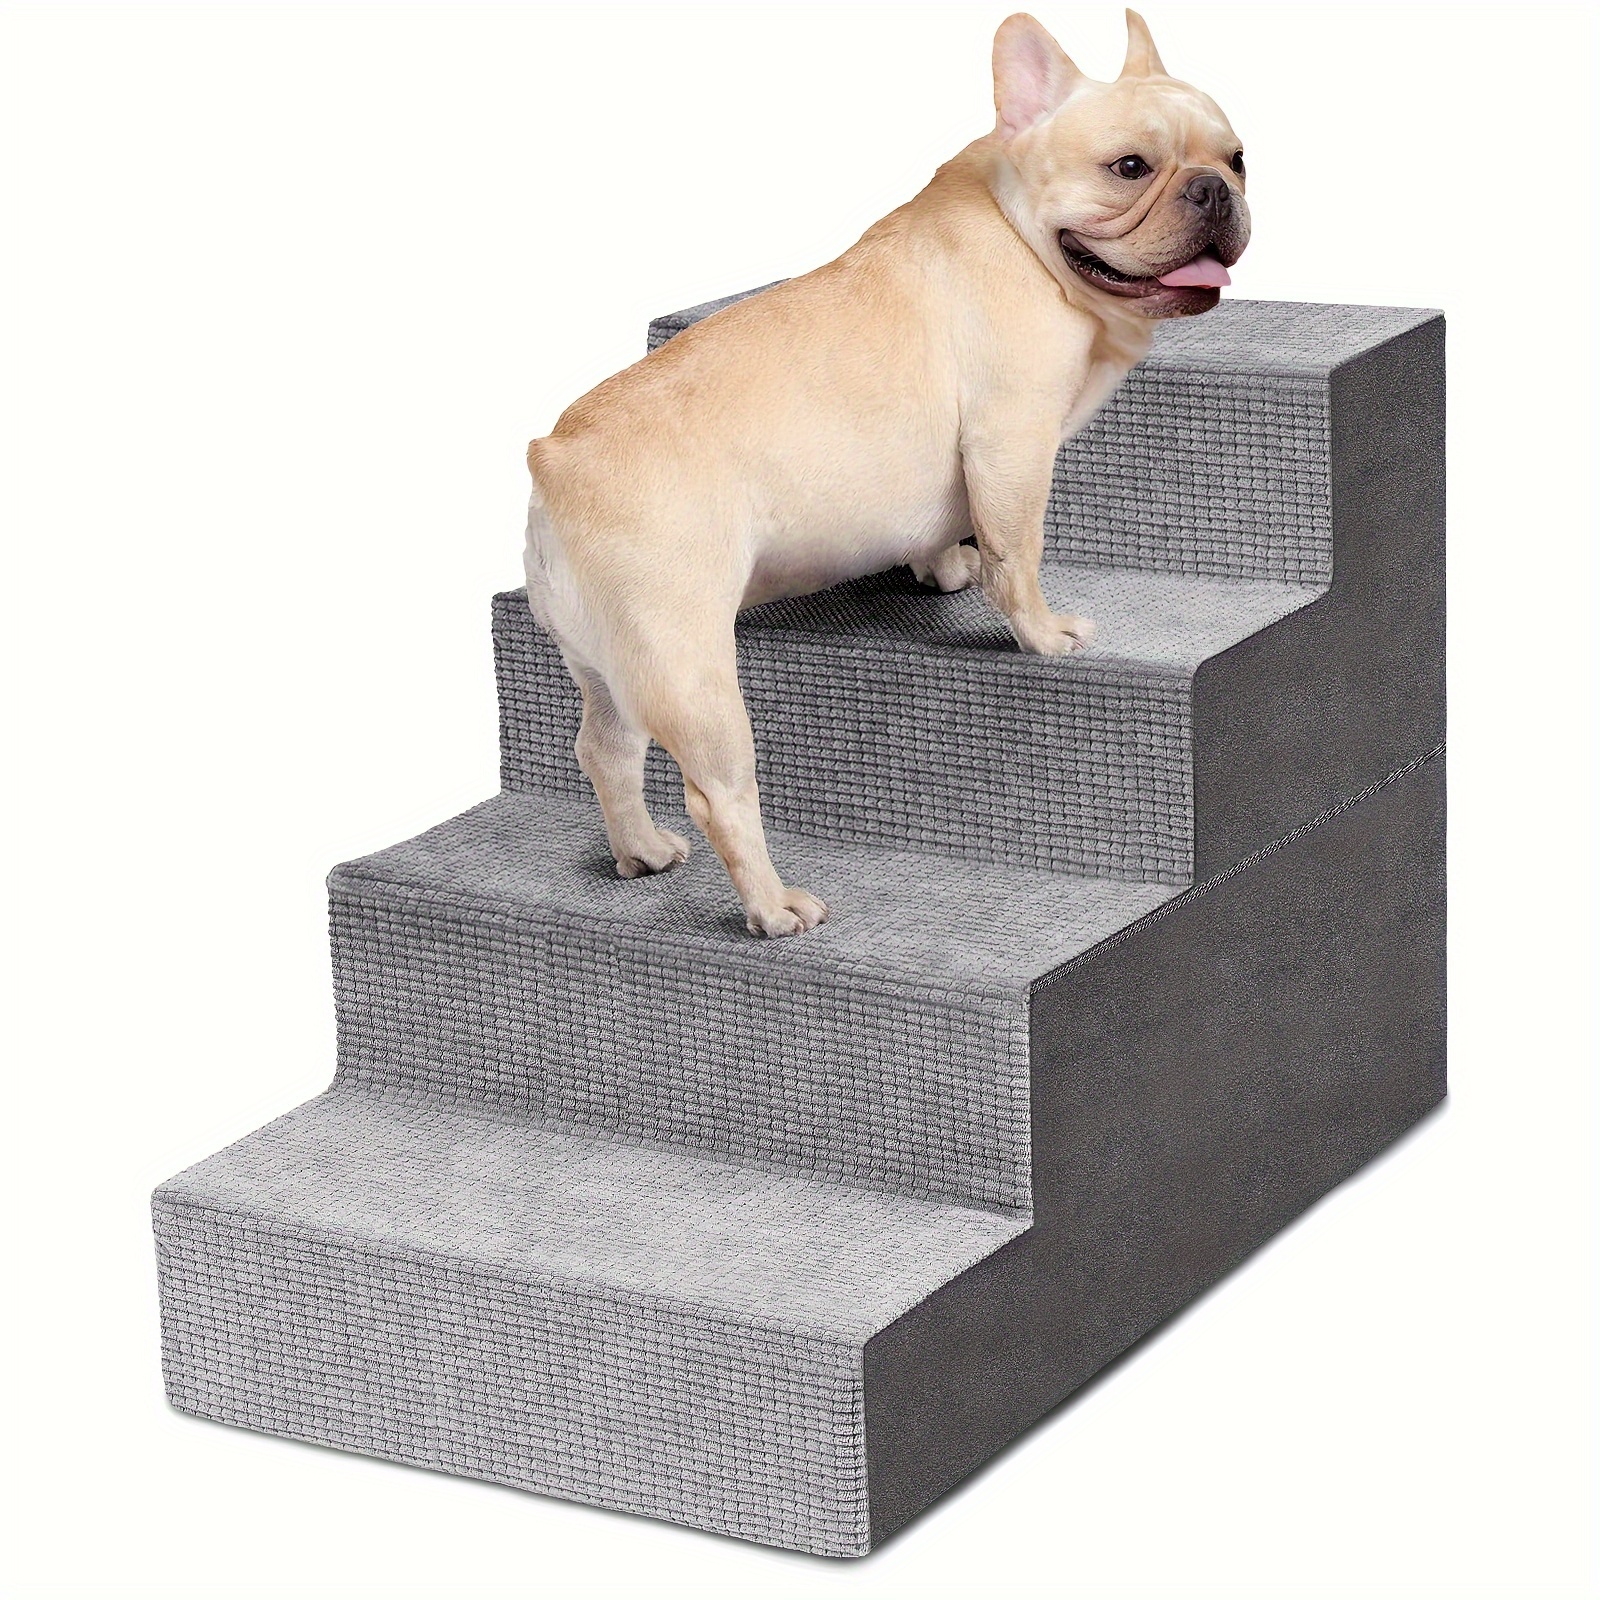 

1pc 5-step Dog Stairs For High Beds & Couches, High-density Foam Pet Steps With Support Board, Non-slip, Washable Cover, Grey, For Small Dogs/cats